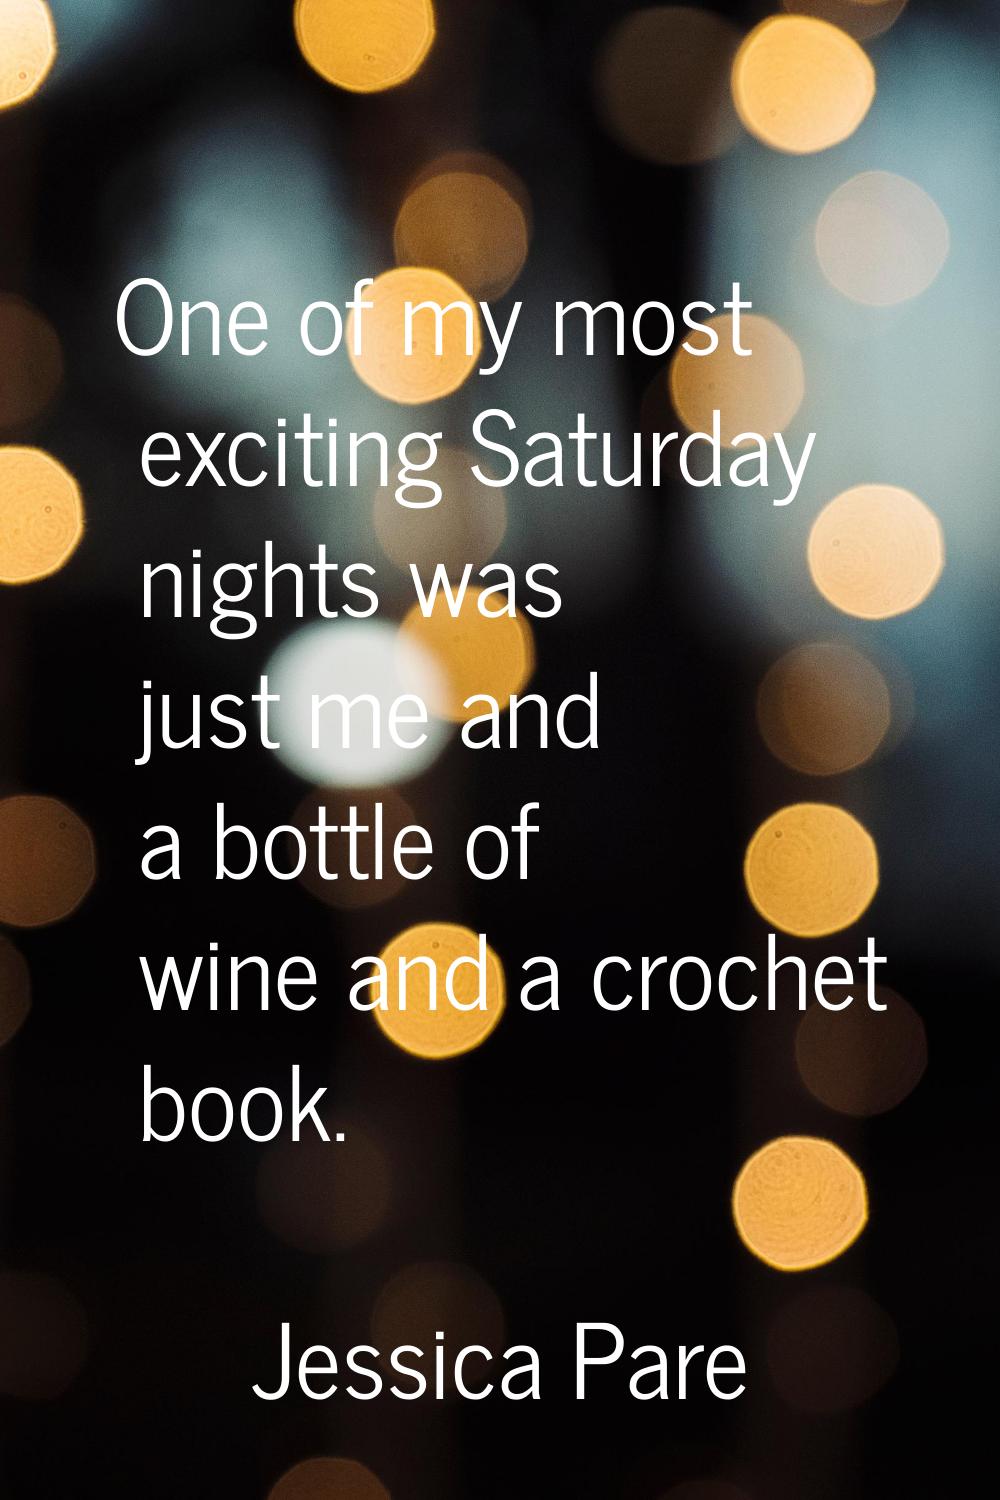 One of my most exciting Saturday nights was just me and a bottle of wine and a crochet book.